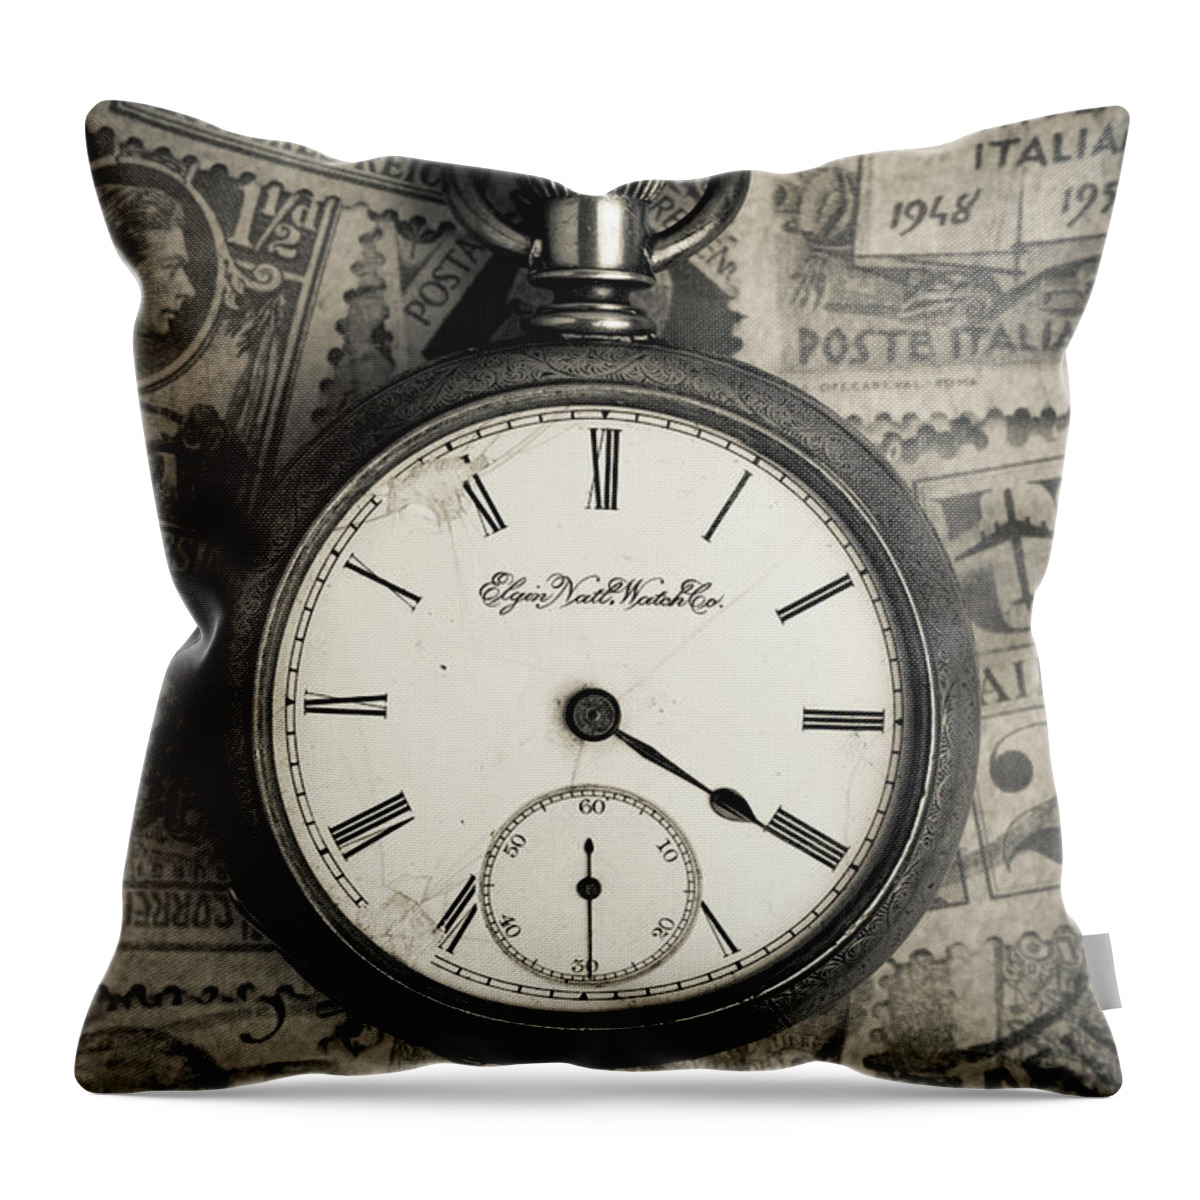 Still Life Throw Pillow featuring the photograph Vintage Pocket Watch by Edward Fielding